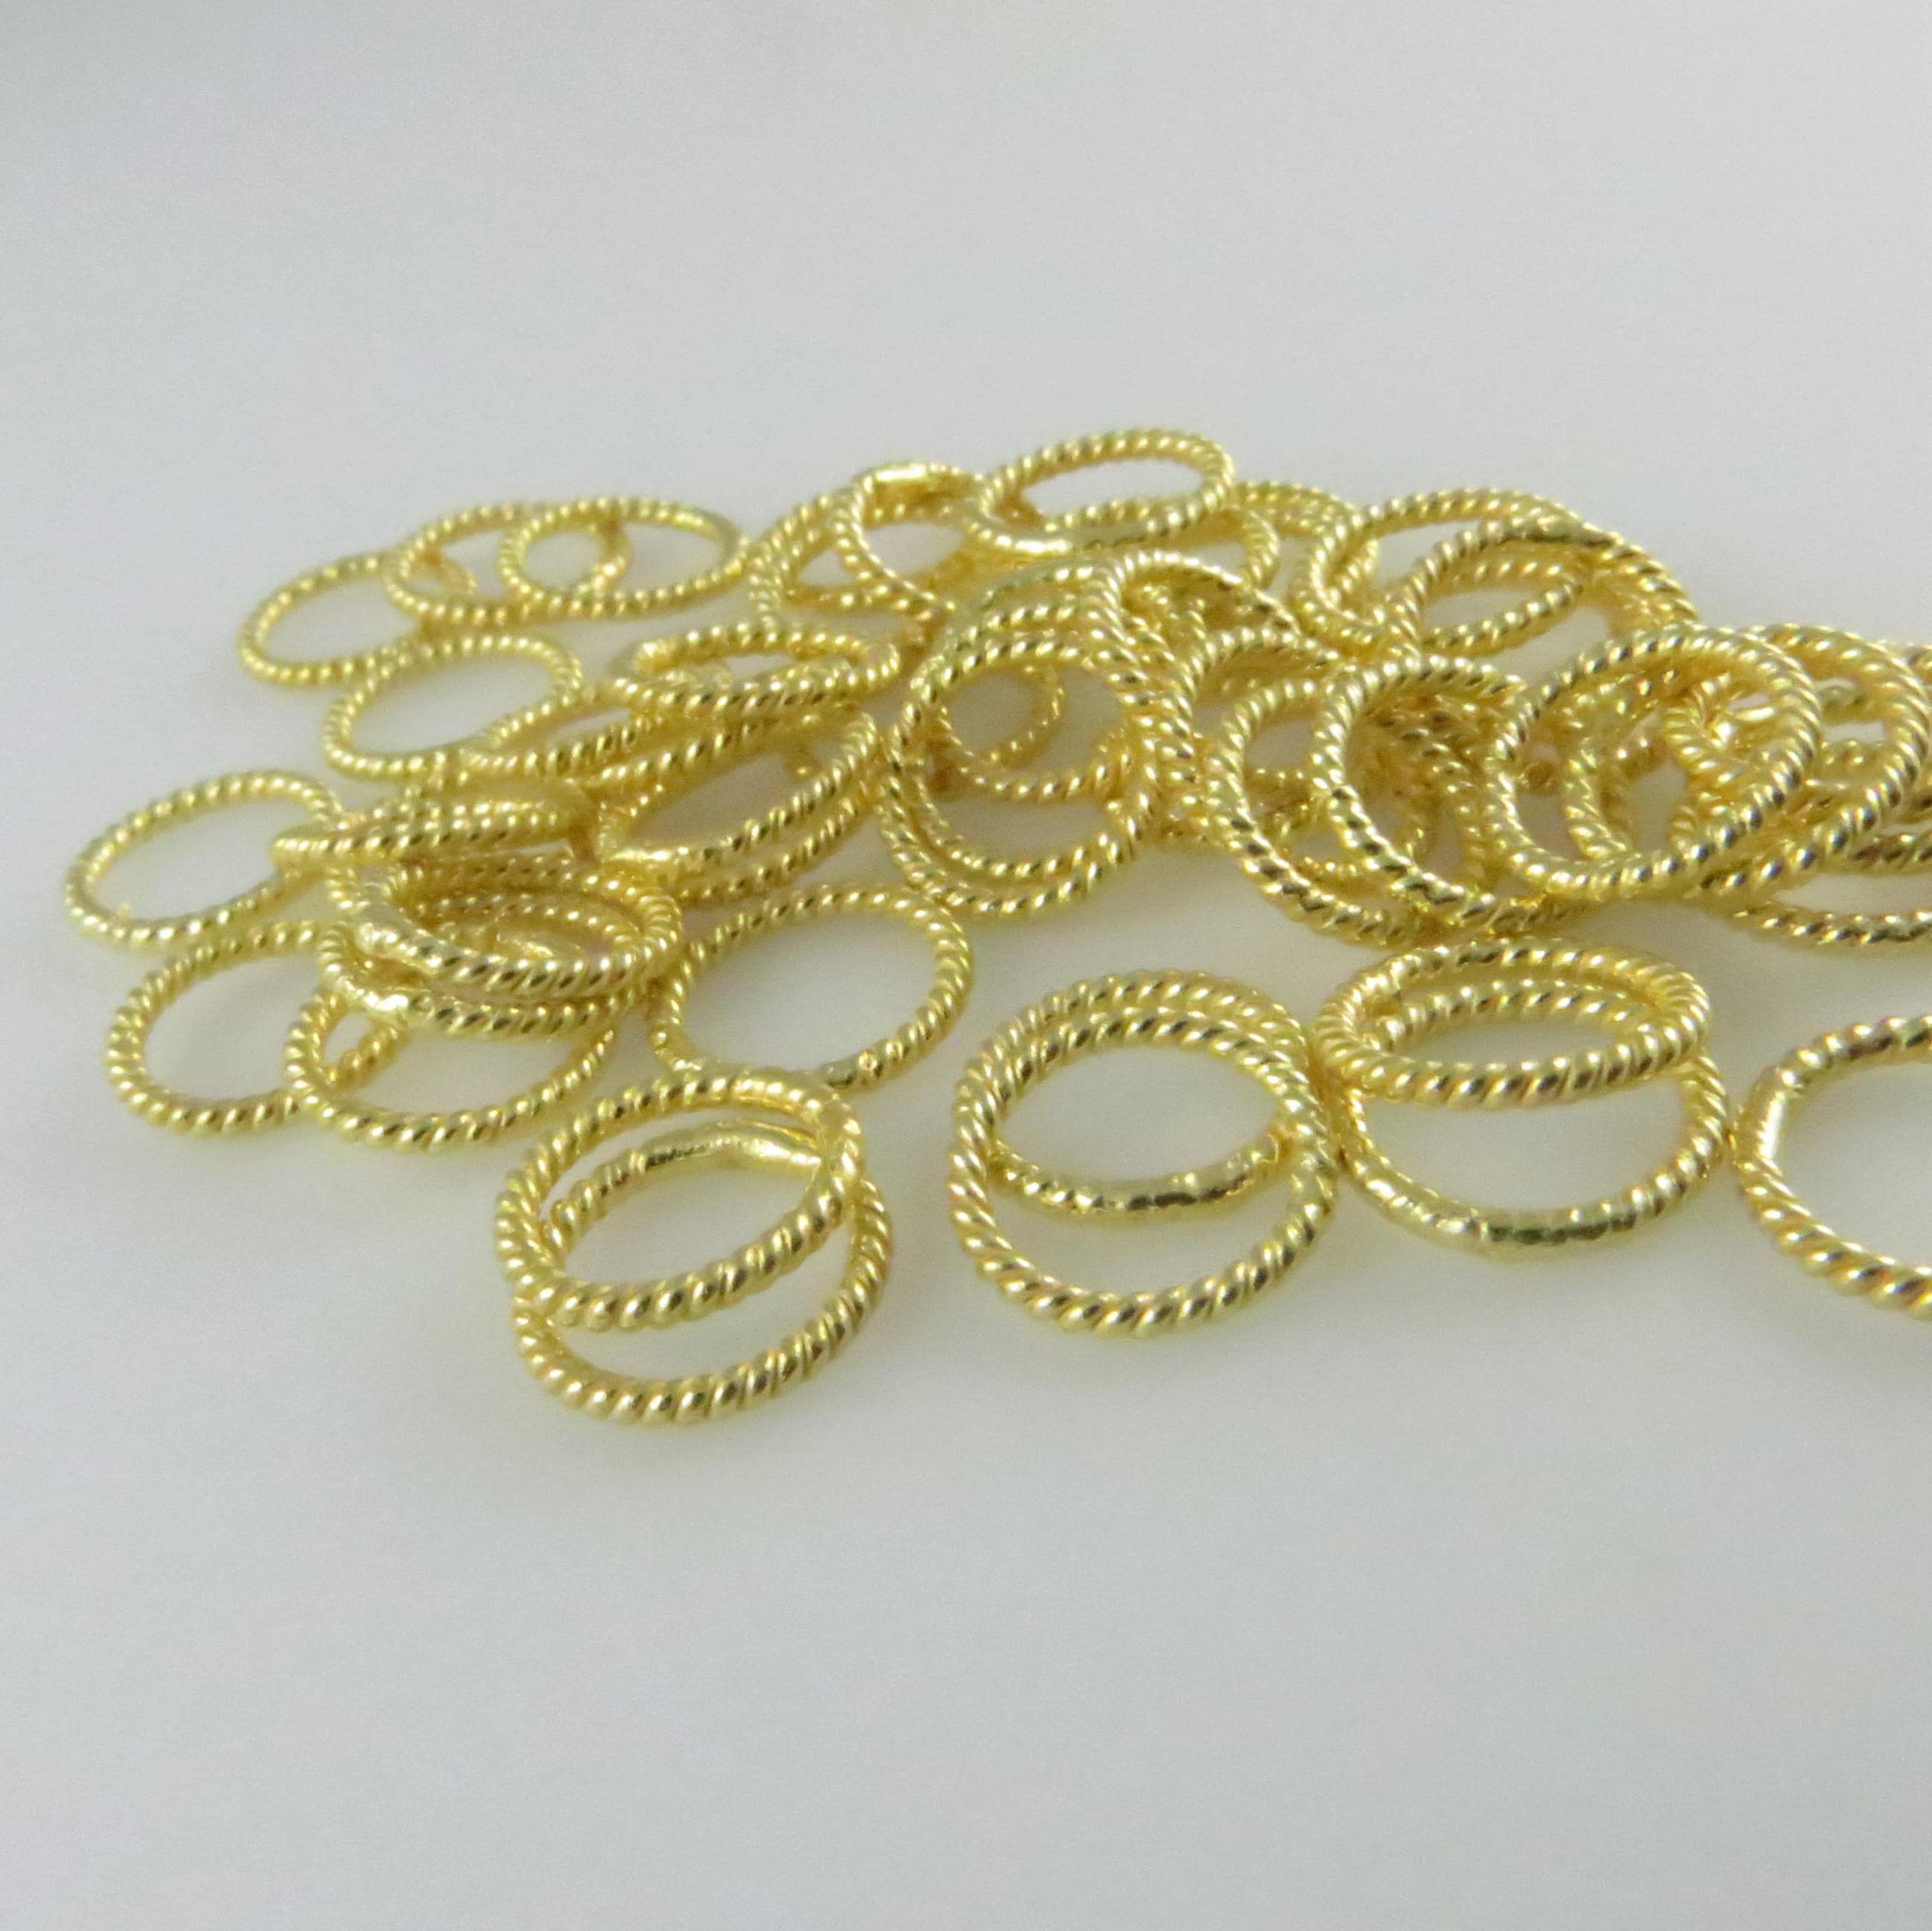 Stainless Steel Gold Jump Rings, 13 mm Open Twisted Silver Rings #384,  Large Textured 12 Gauge